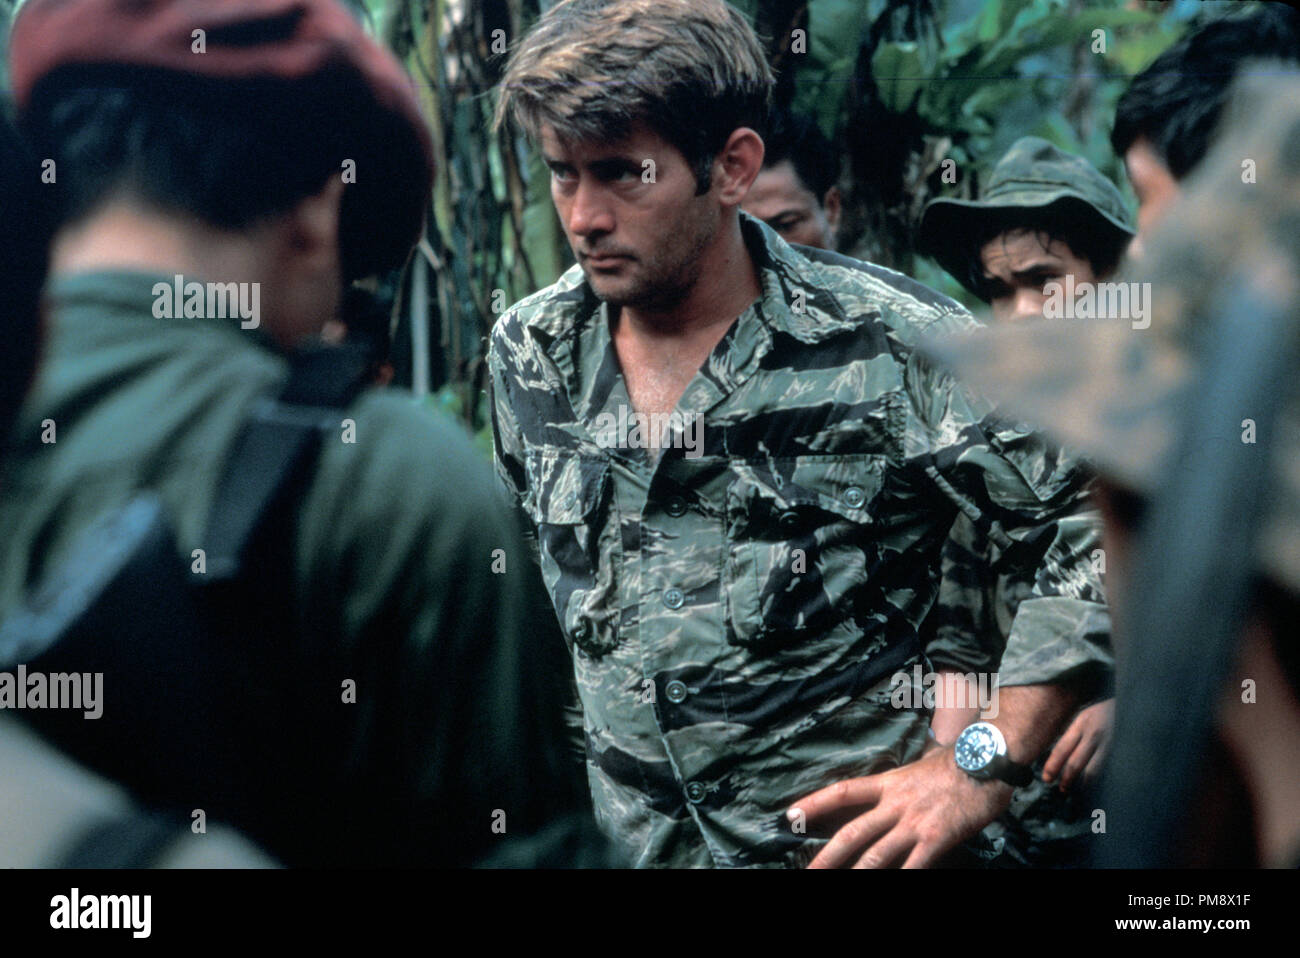 Studio Publicity Still from 'Apocalypse Now' Martin Sheen © 1979 United Artists  All Rights Reserved   File Reference # 31718153THA  For Editorial Use Only Stock Photo